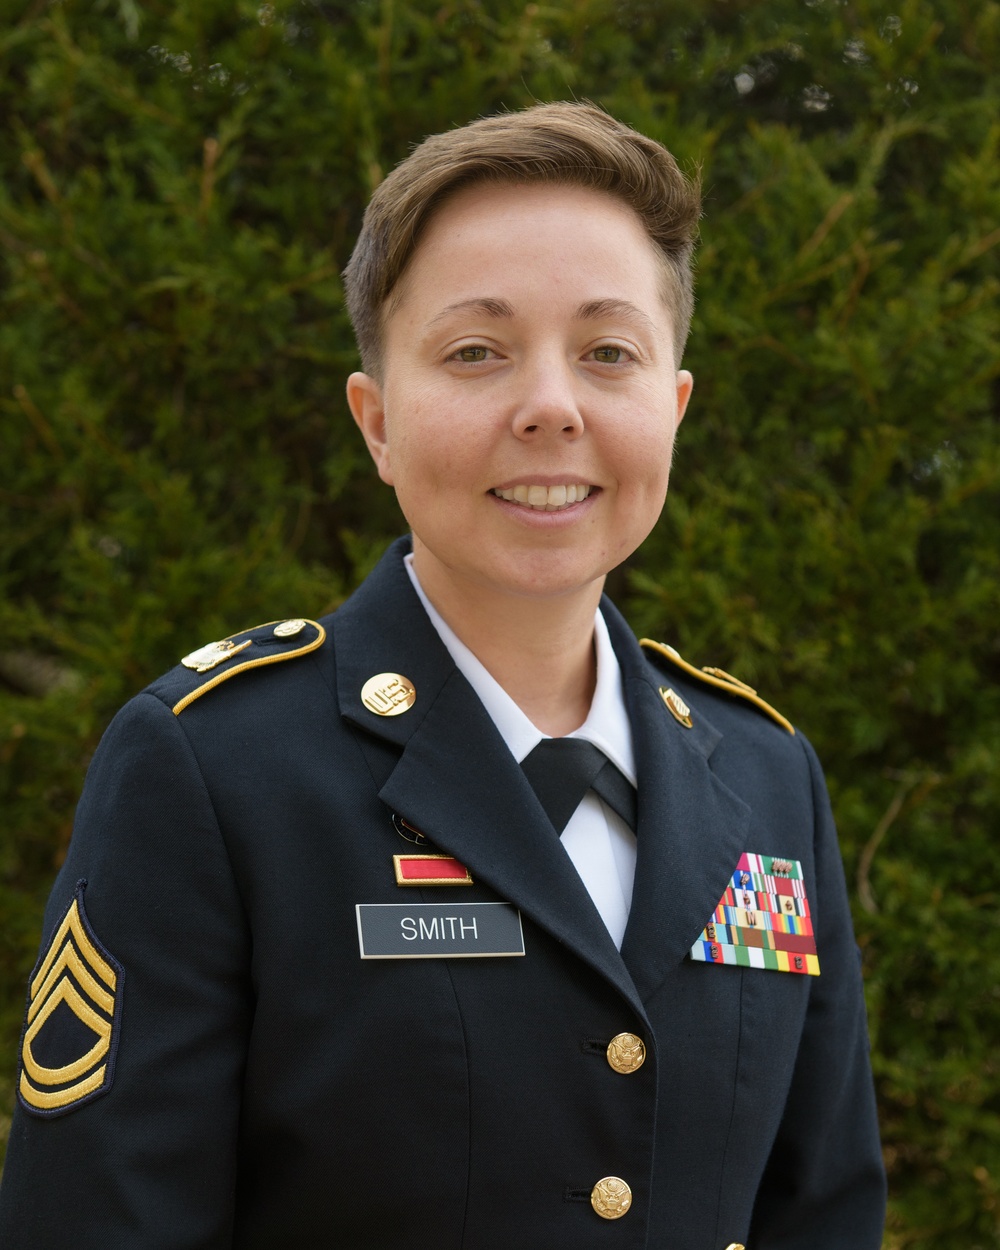 Oklahoma Army National Guard recruiter earns greatest number of enlistments over the past year.